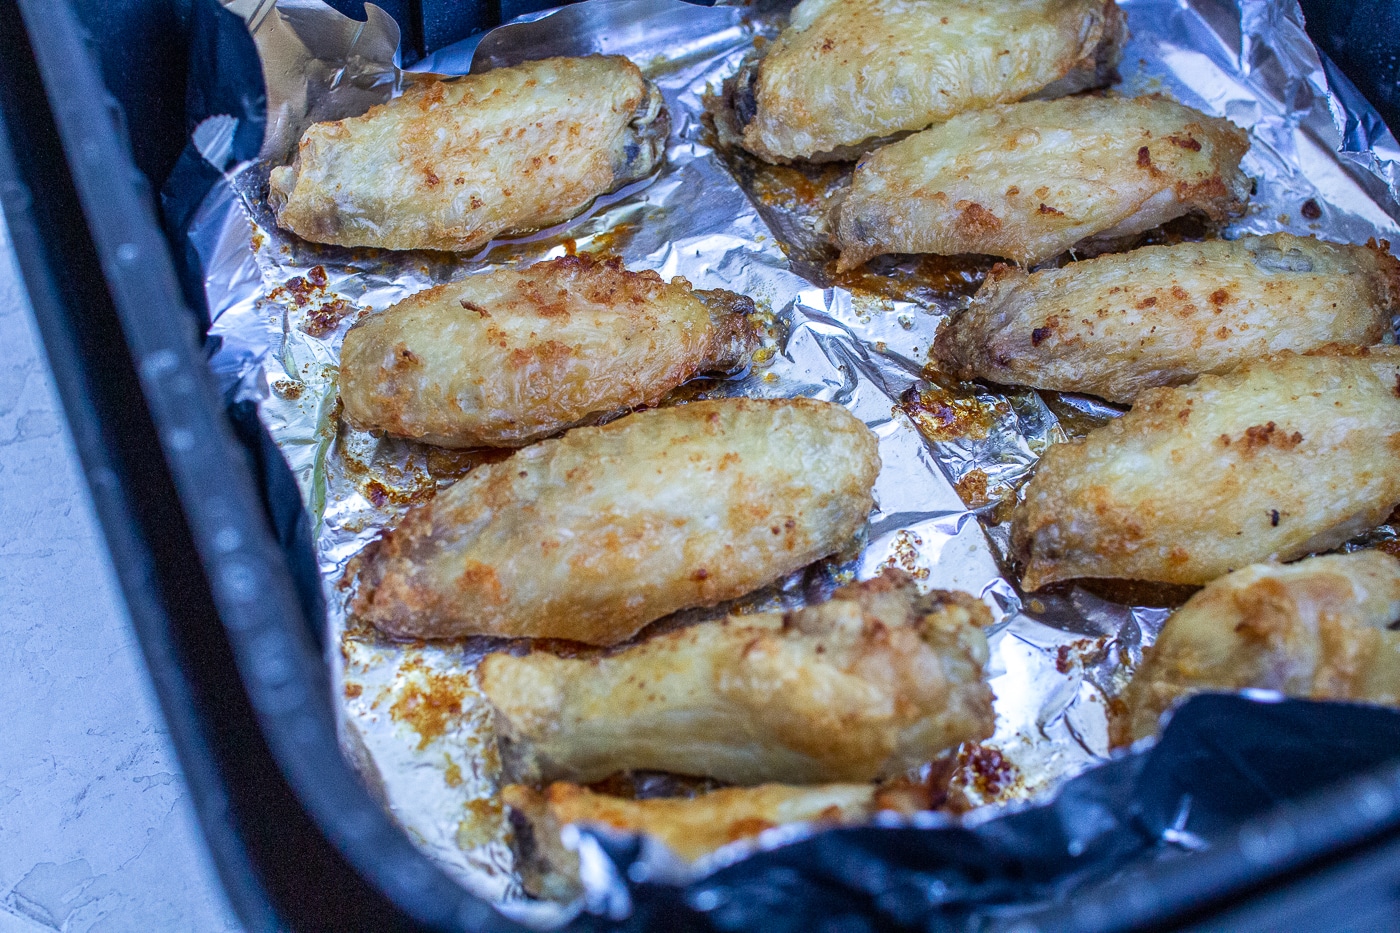 cooked chicken wing pieces arranged in a foil lined air fryer basket